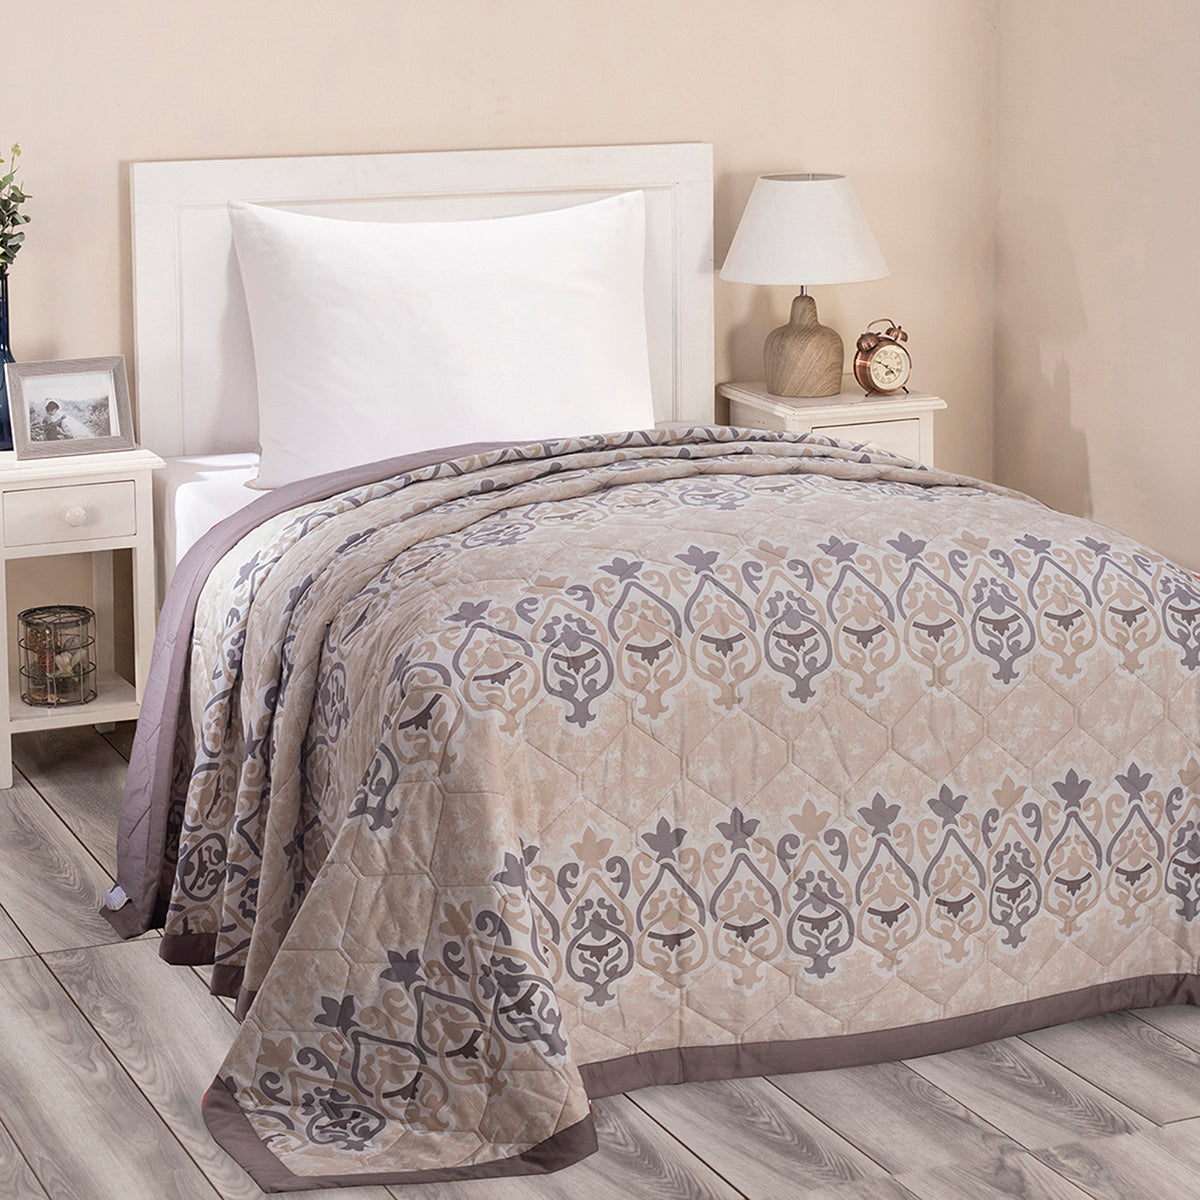 Nouveau Tradition Kaleen Global Summer AC Quilt/Quilted Bed Cover/Comforter Neutral